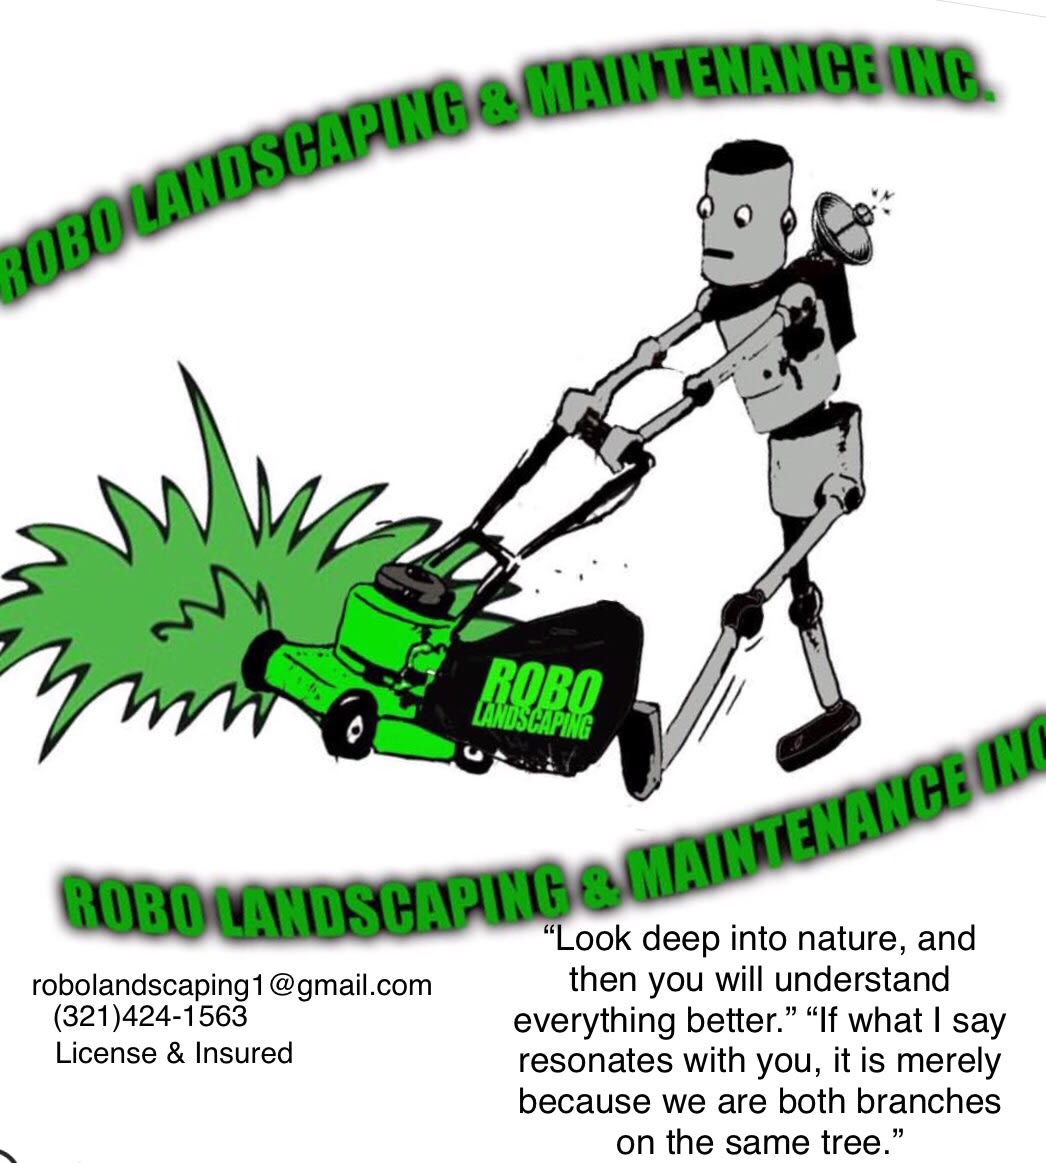 Robo Landscaping & Maintaince